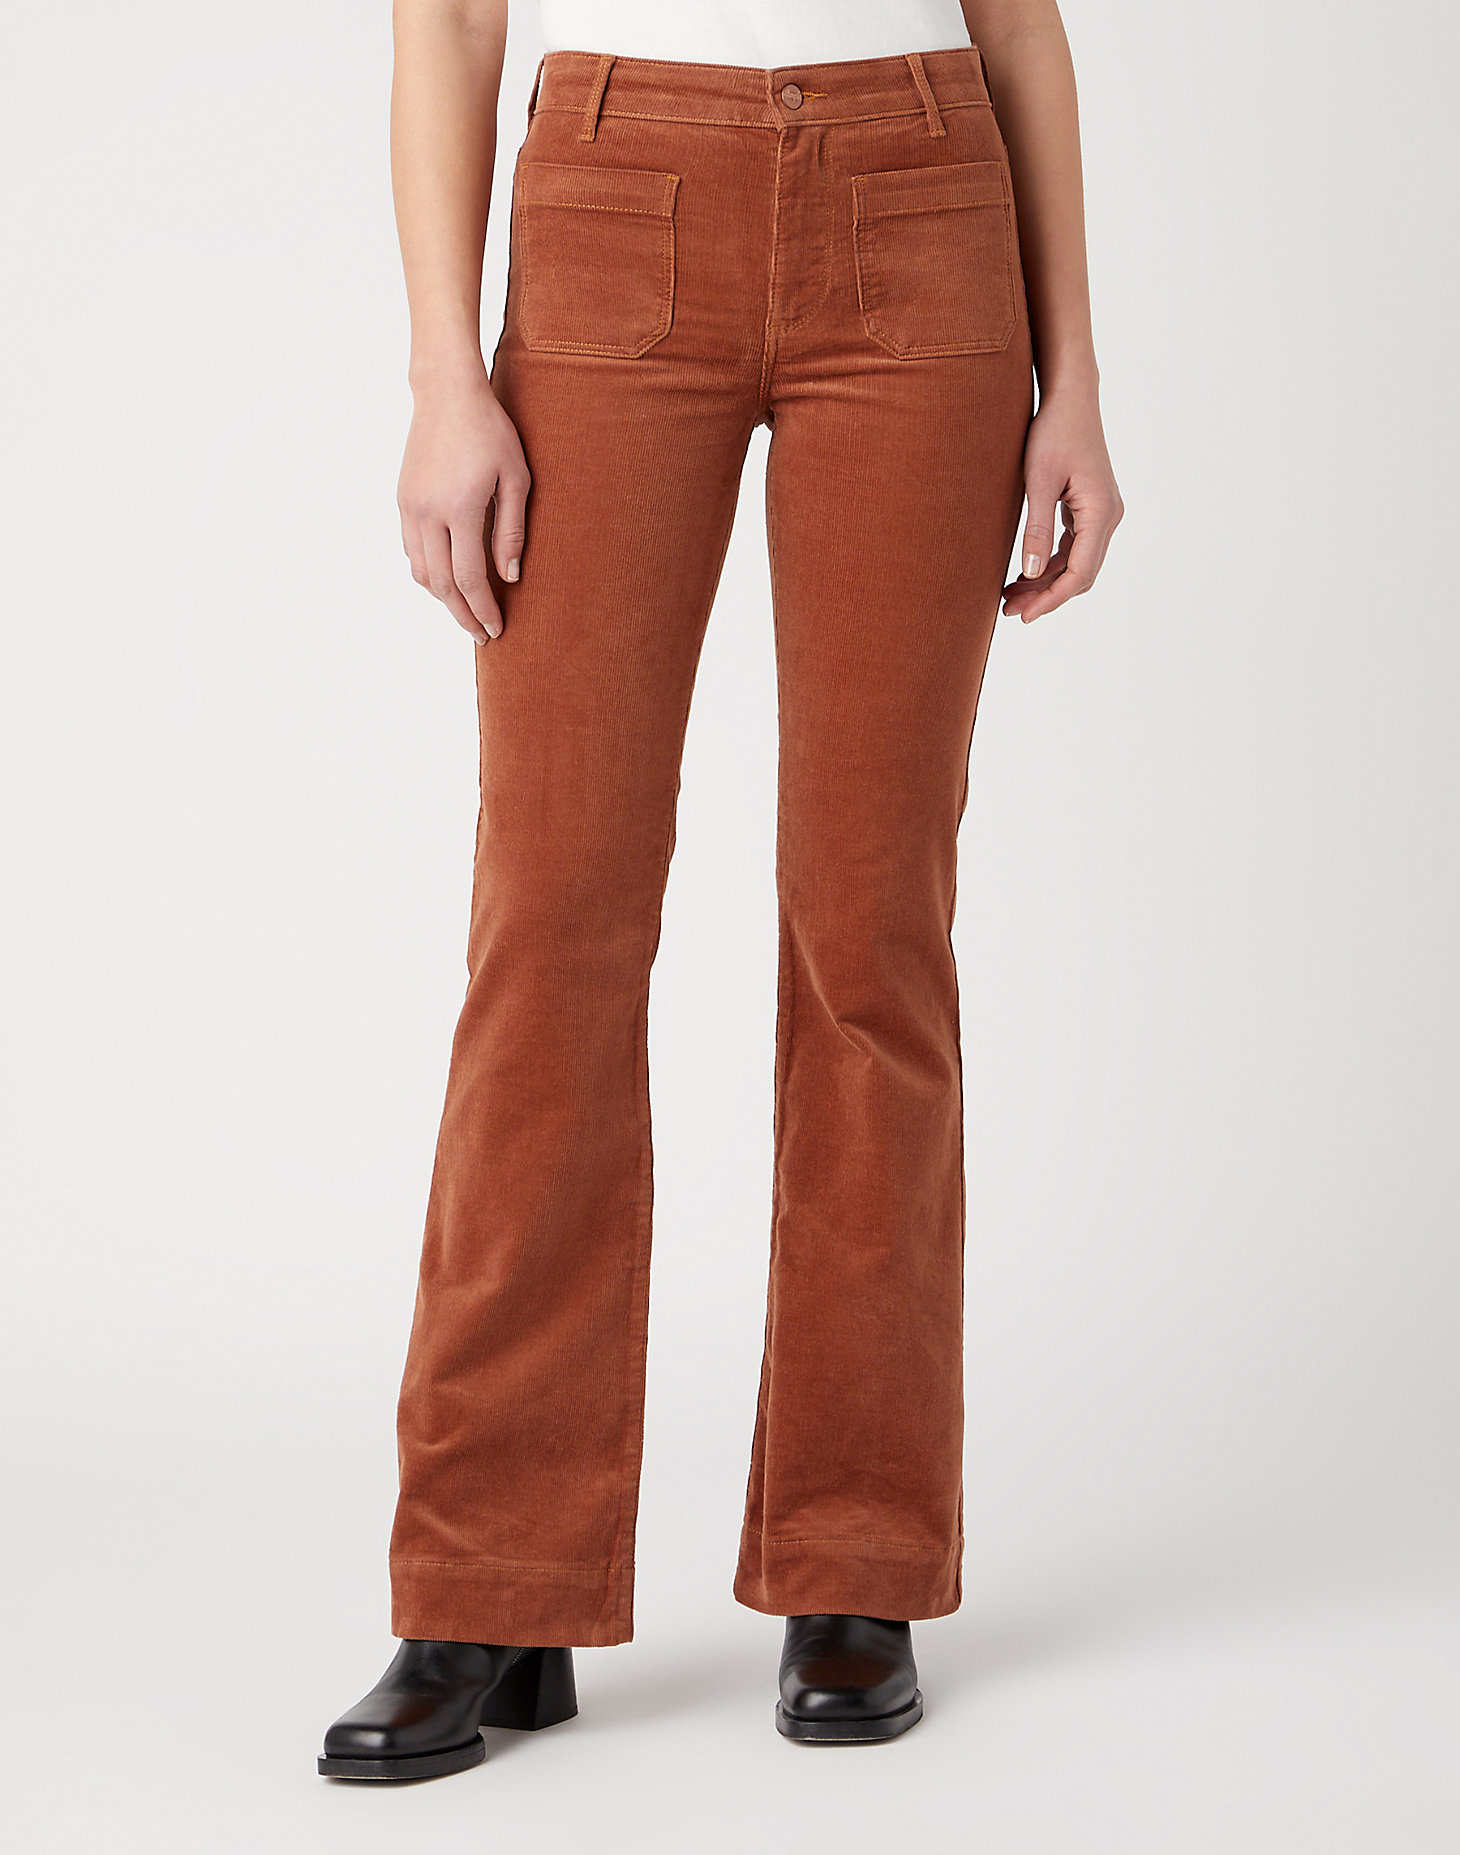 Flare Jeans in Pony Brown main view